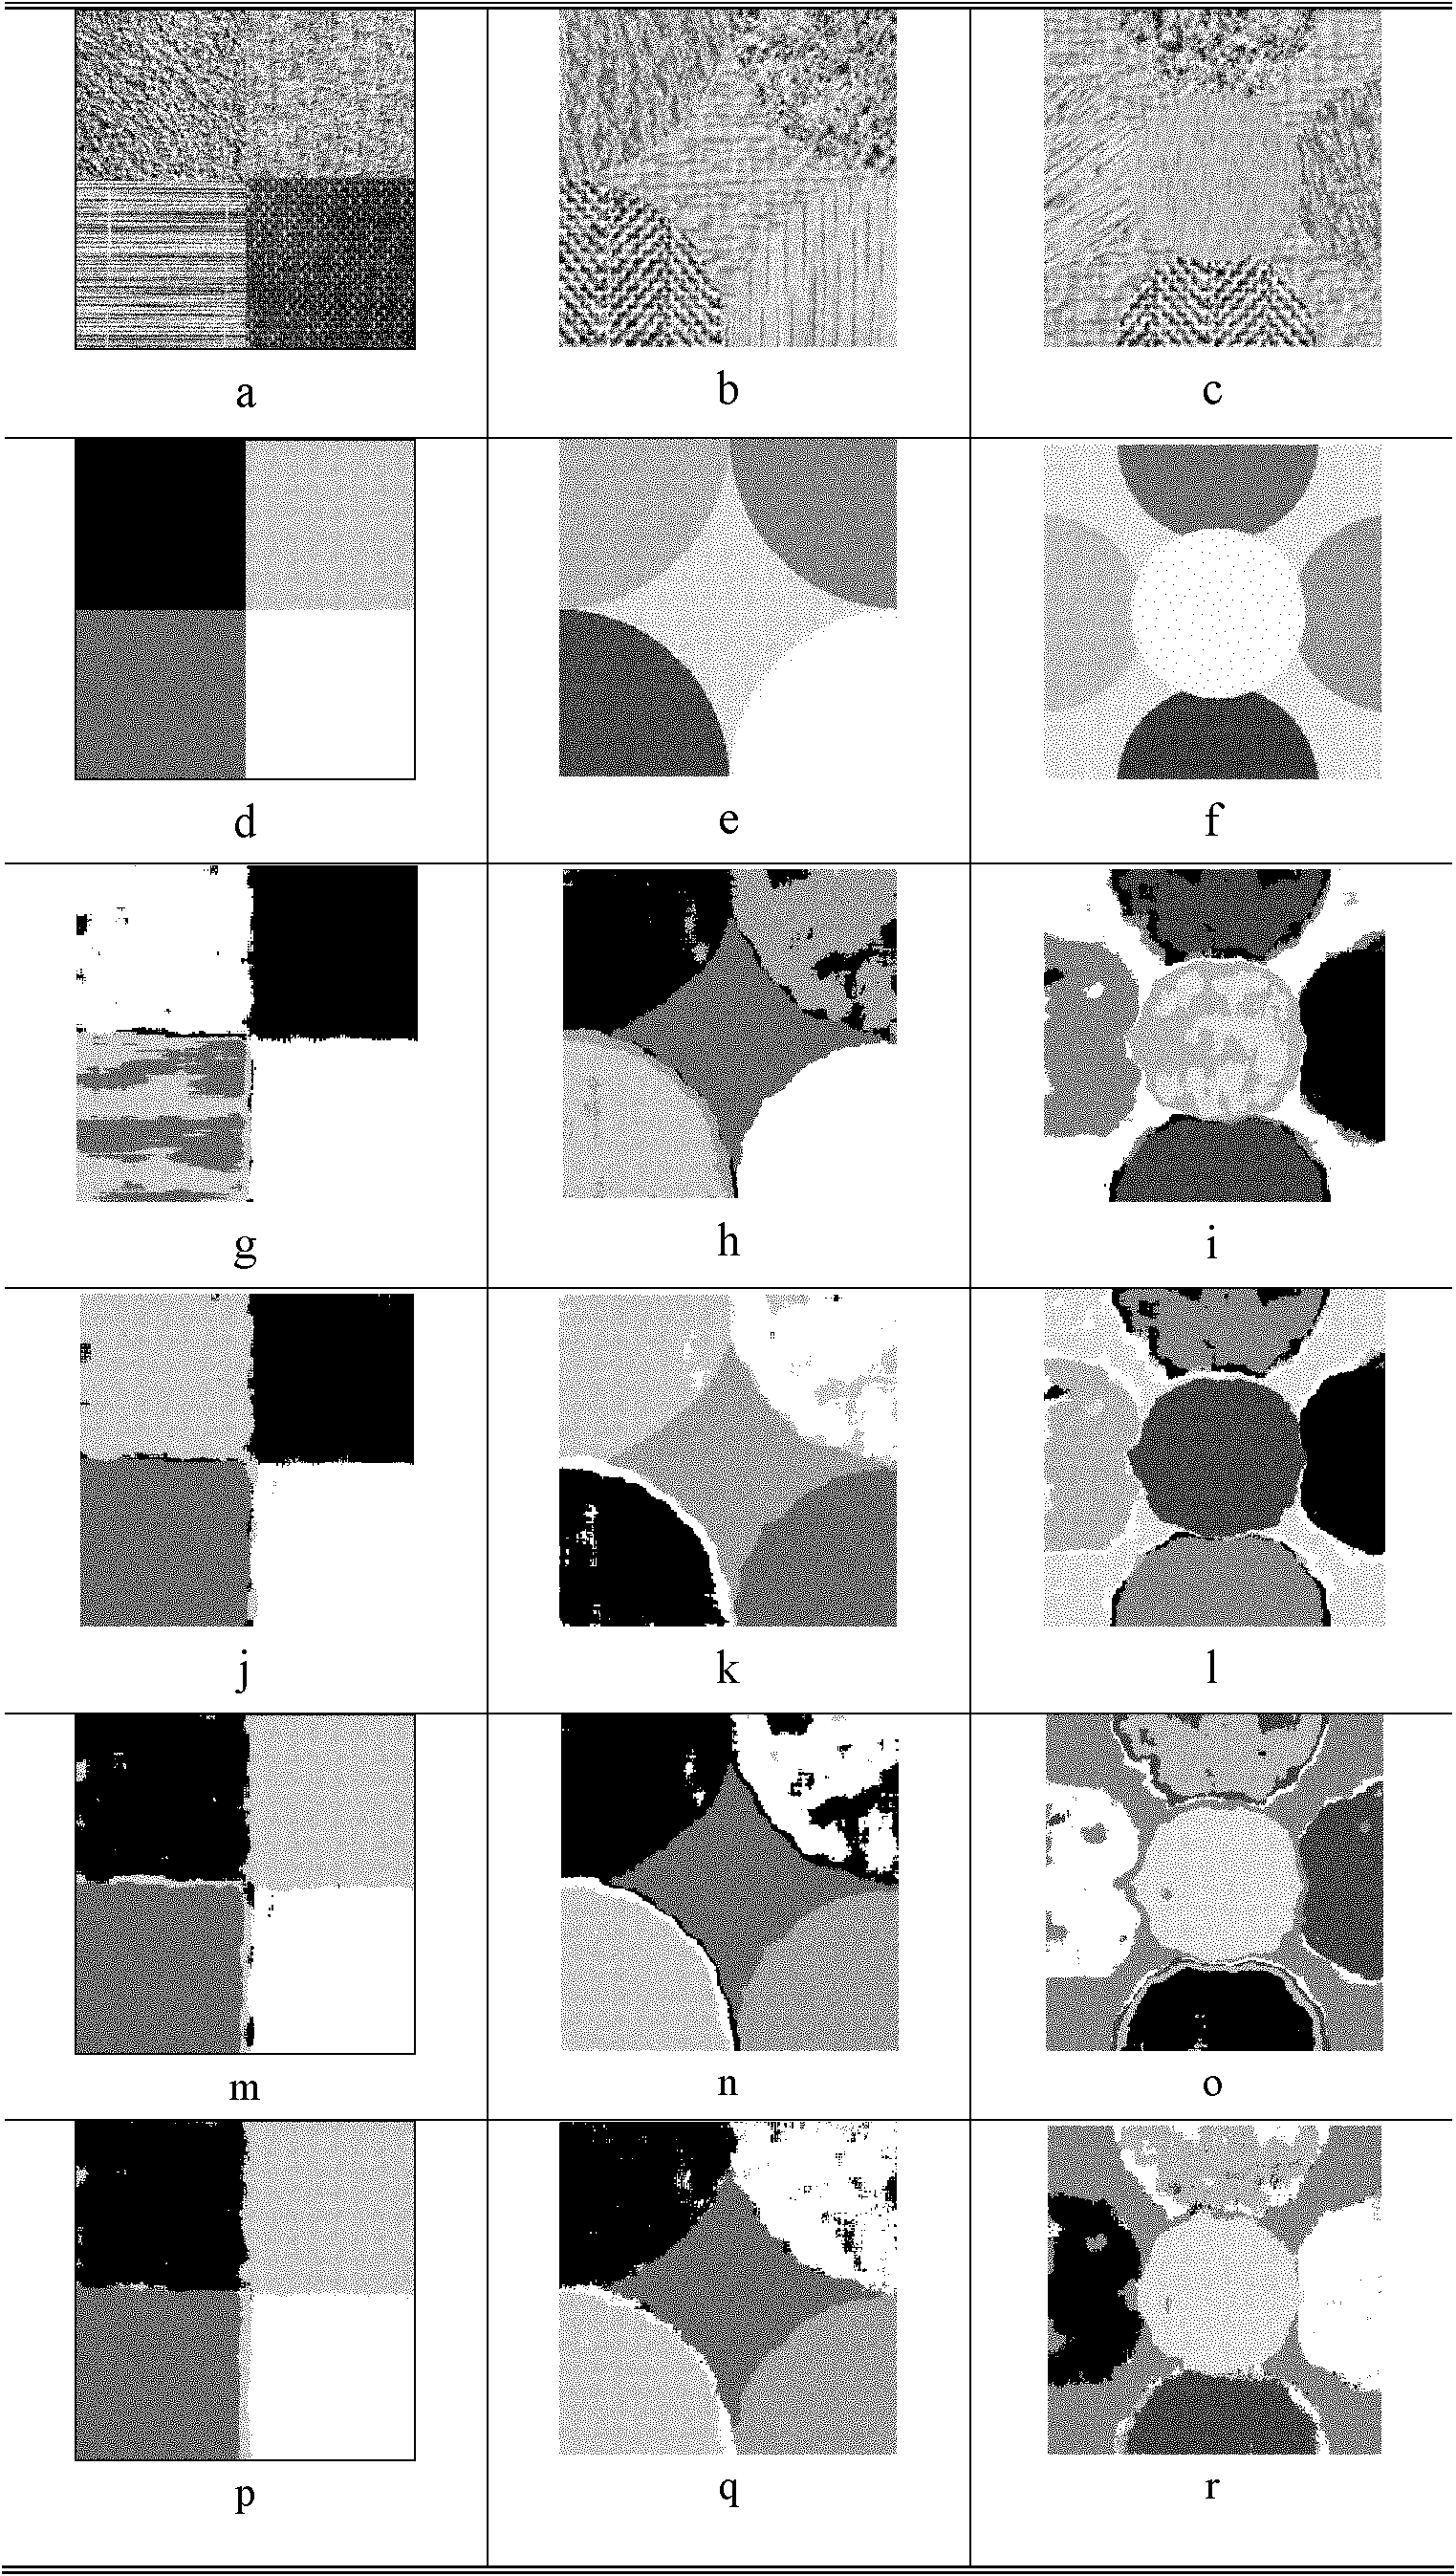 Method for segmenting images by utilizing sparse representation and dictionary learning